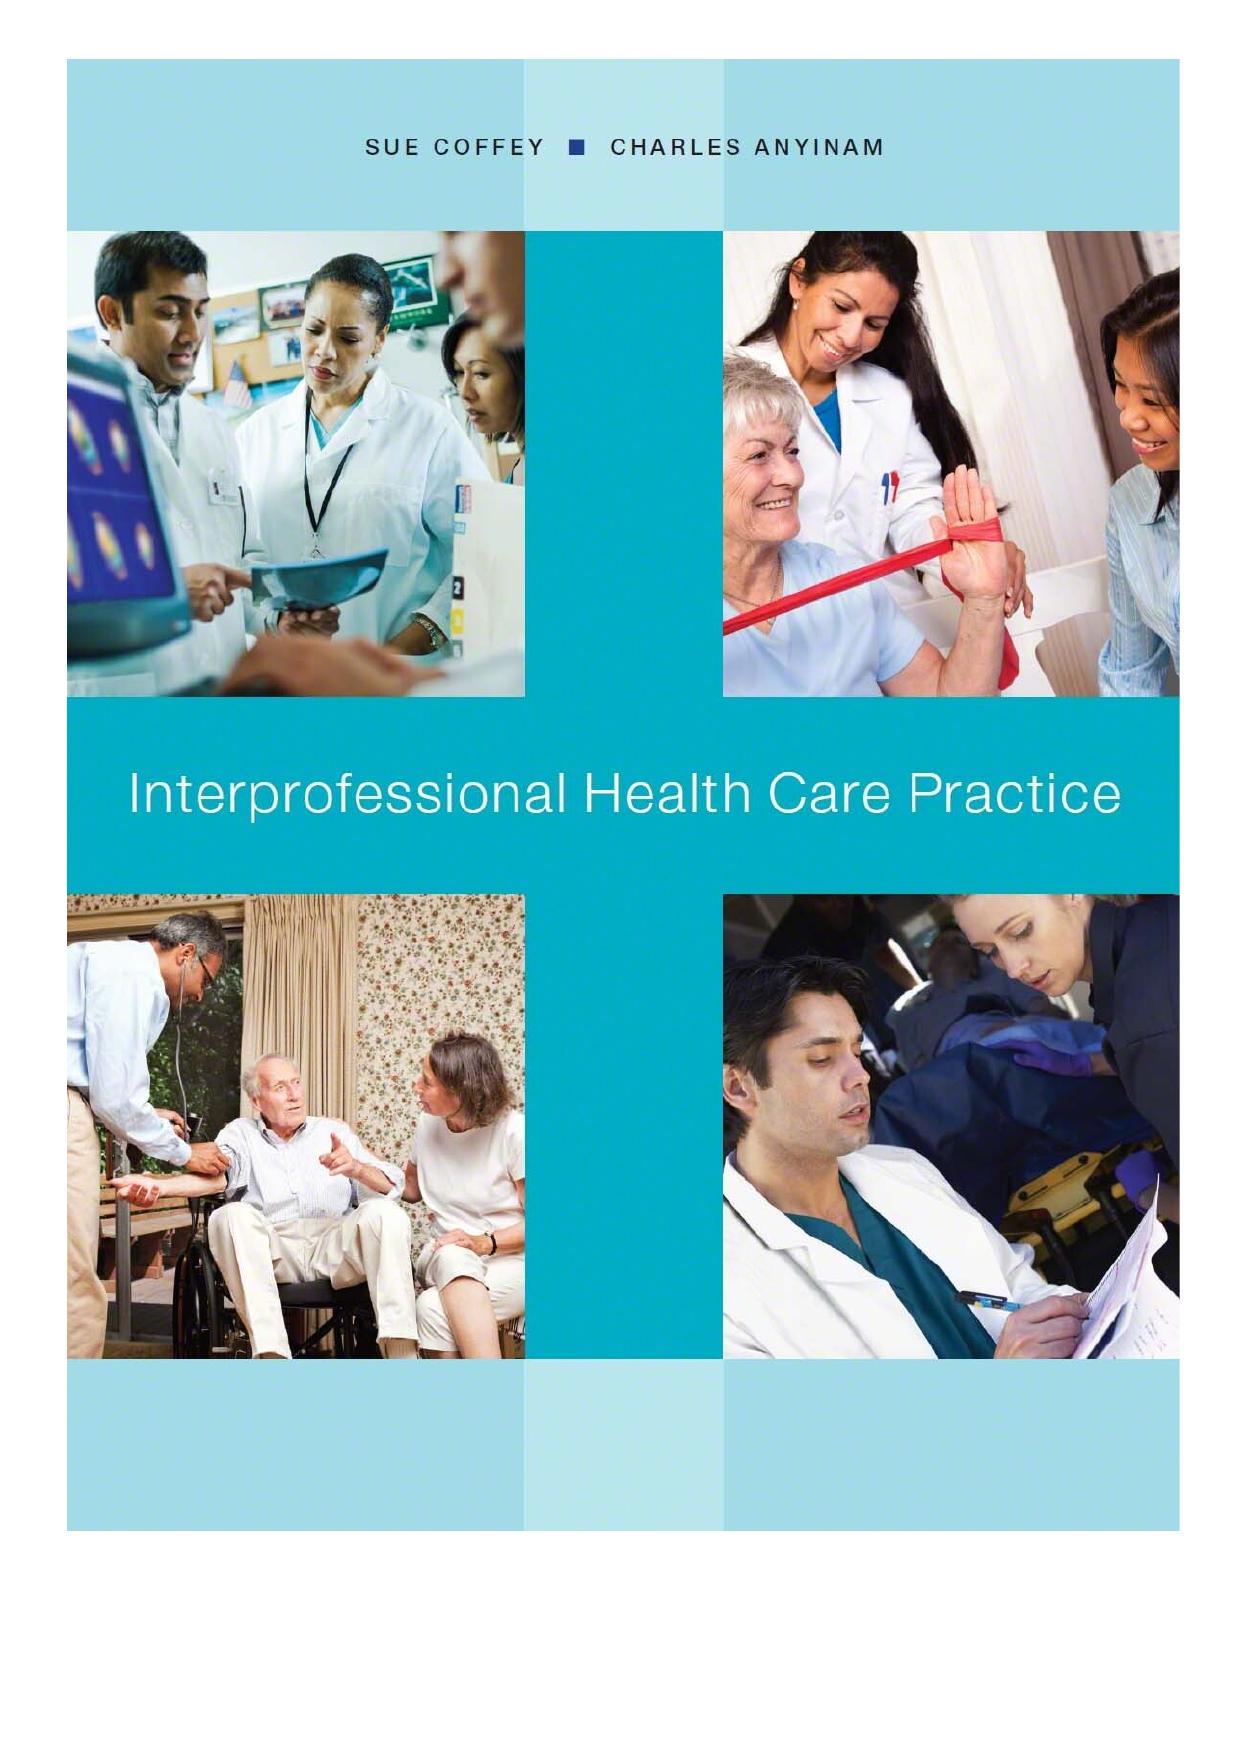 Interprofessional Healthcare Practice (Subscription) by Sue Coffey , Charles Anyinam